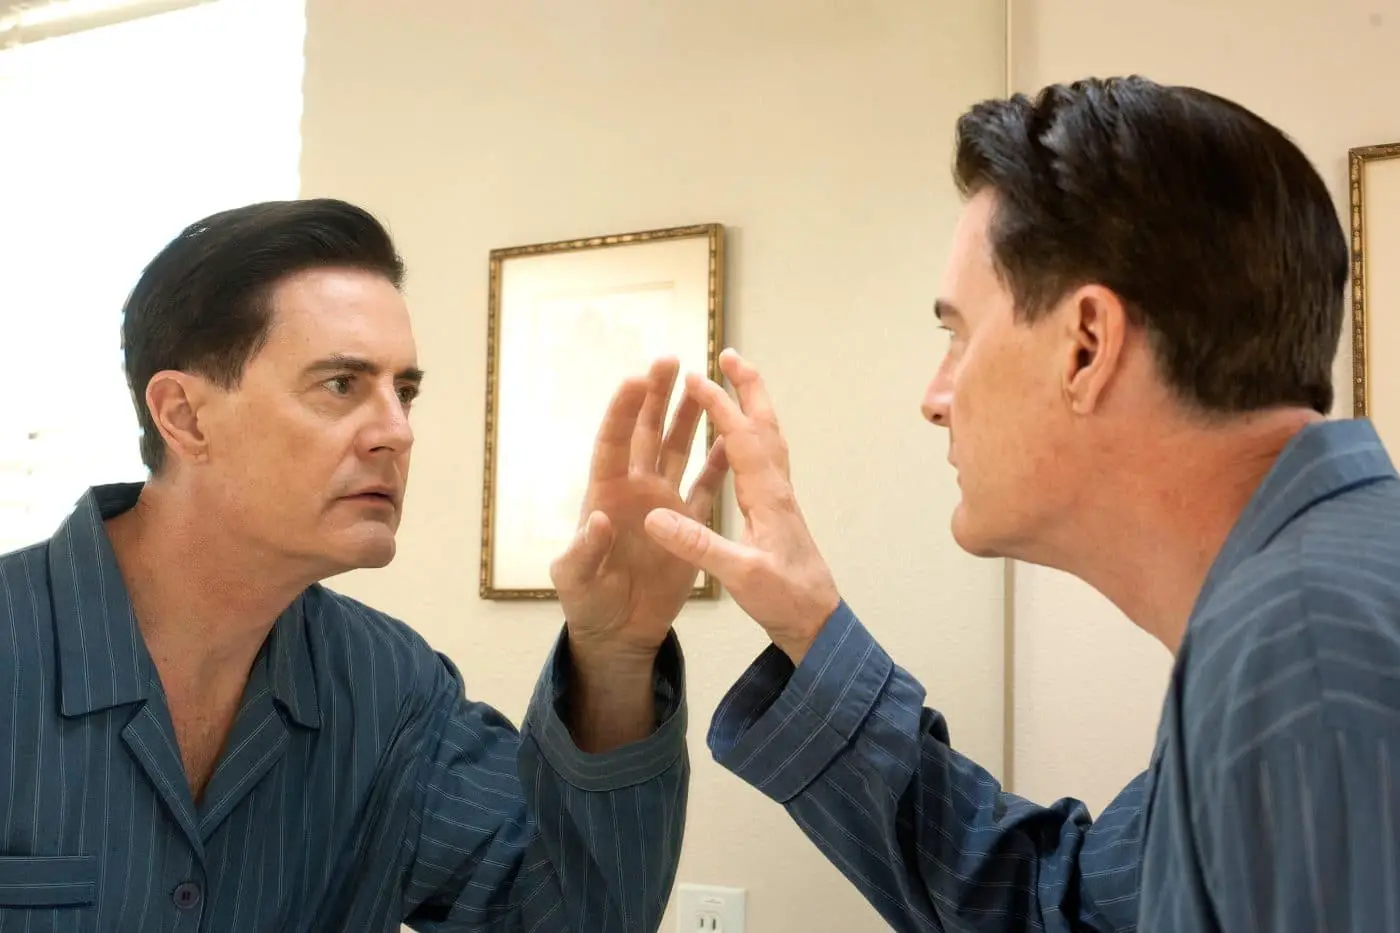 The Case For Casting Kyle MacLachlan | LIVING LIFE FEARLESS